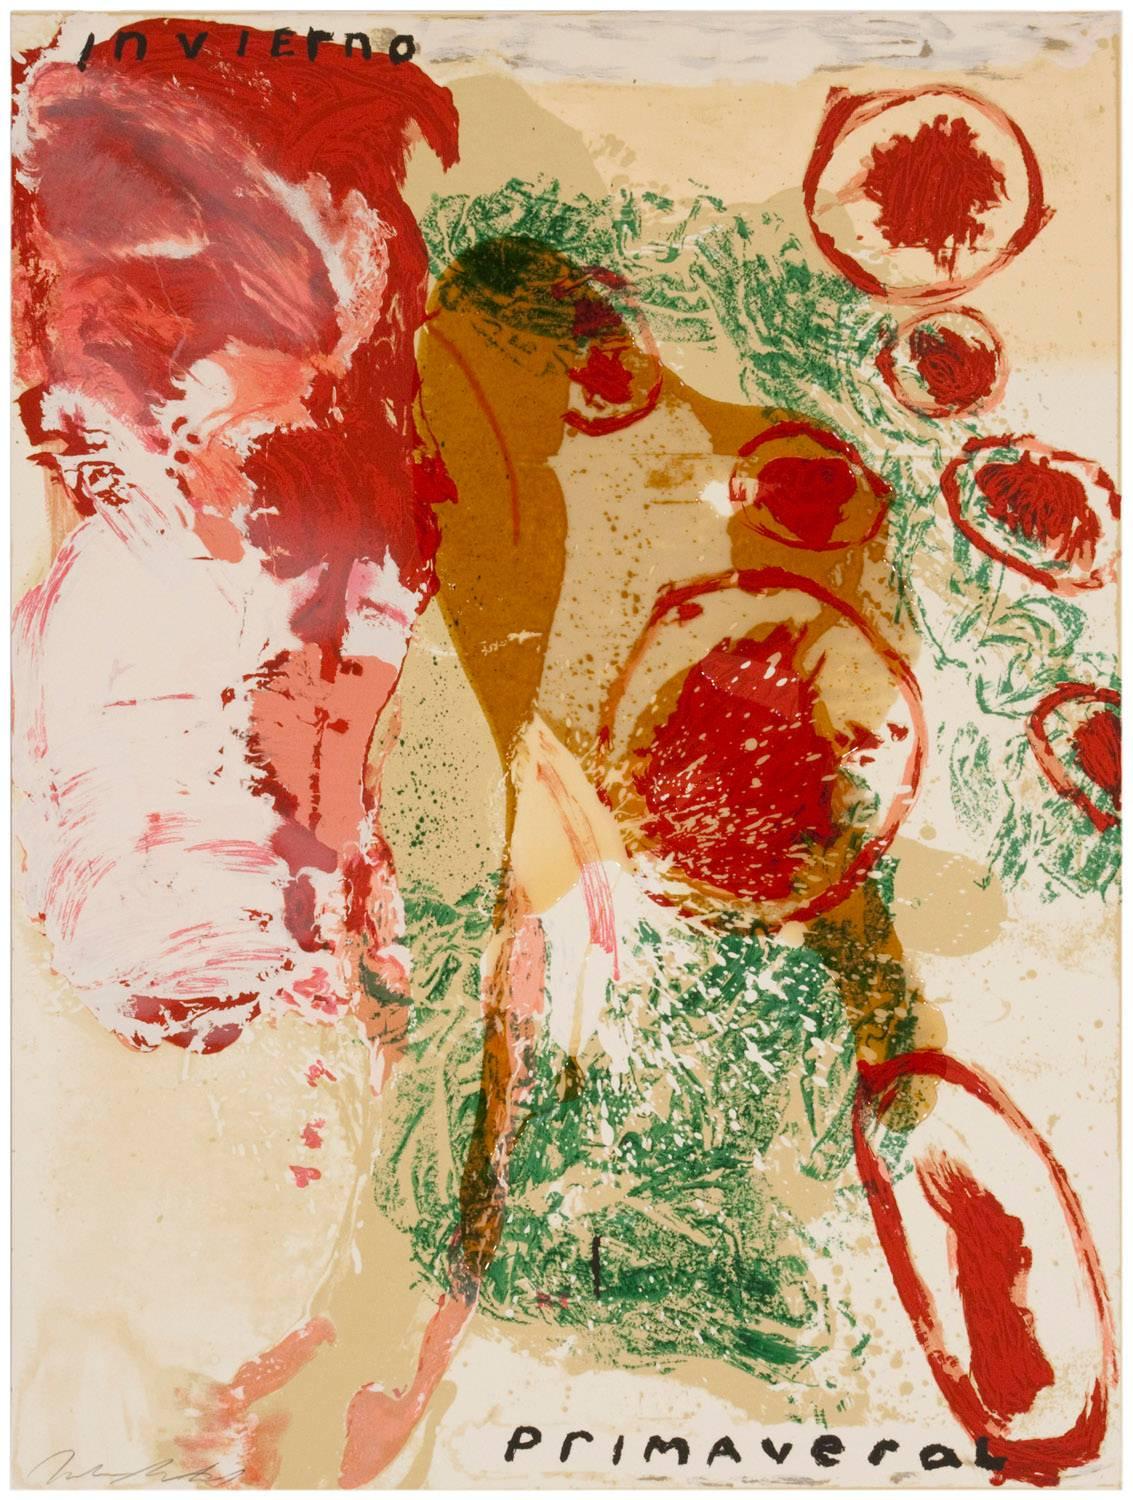 Otono Floral (Sexual Spring-like Winter) - Print by Julian Schnabel